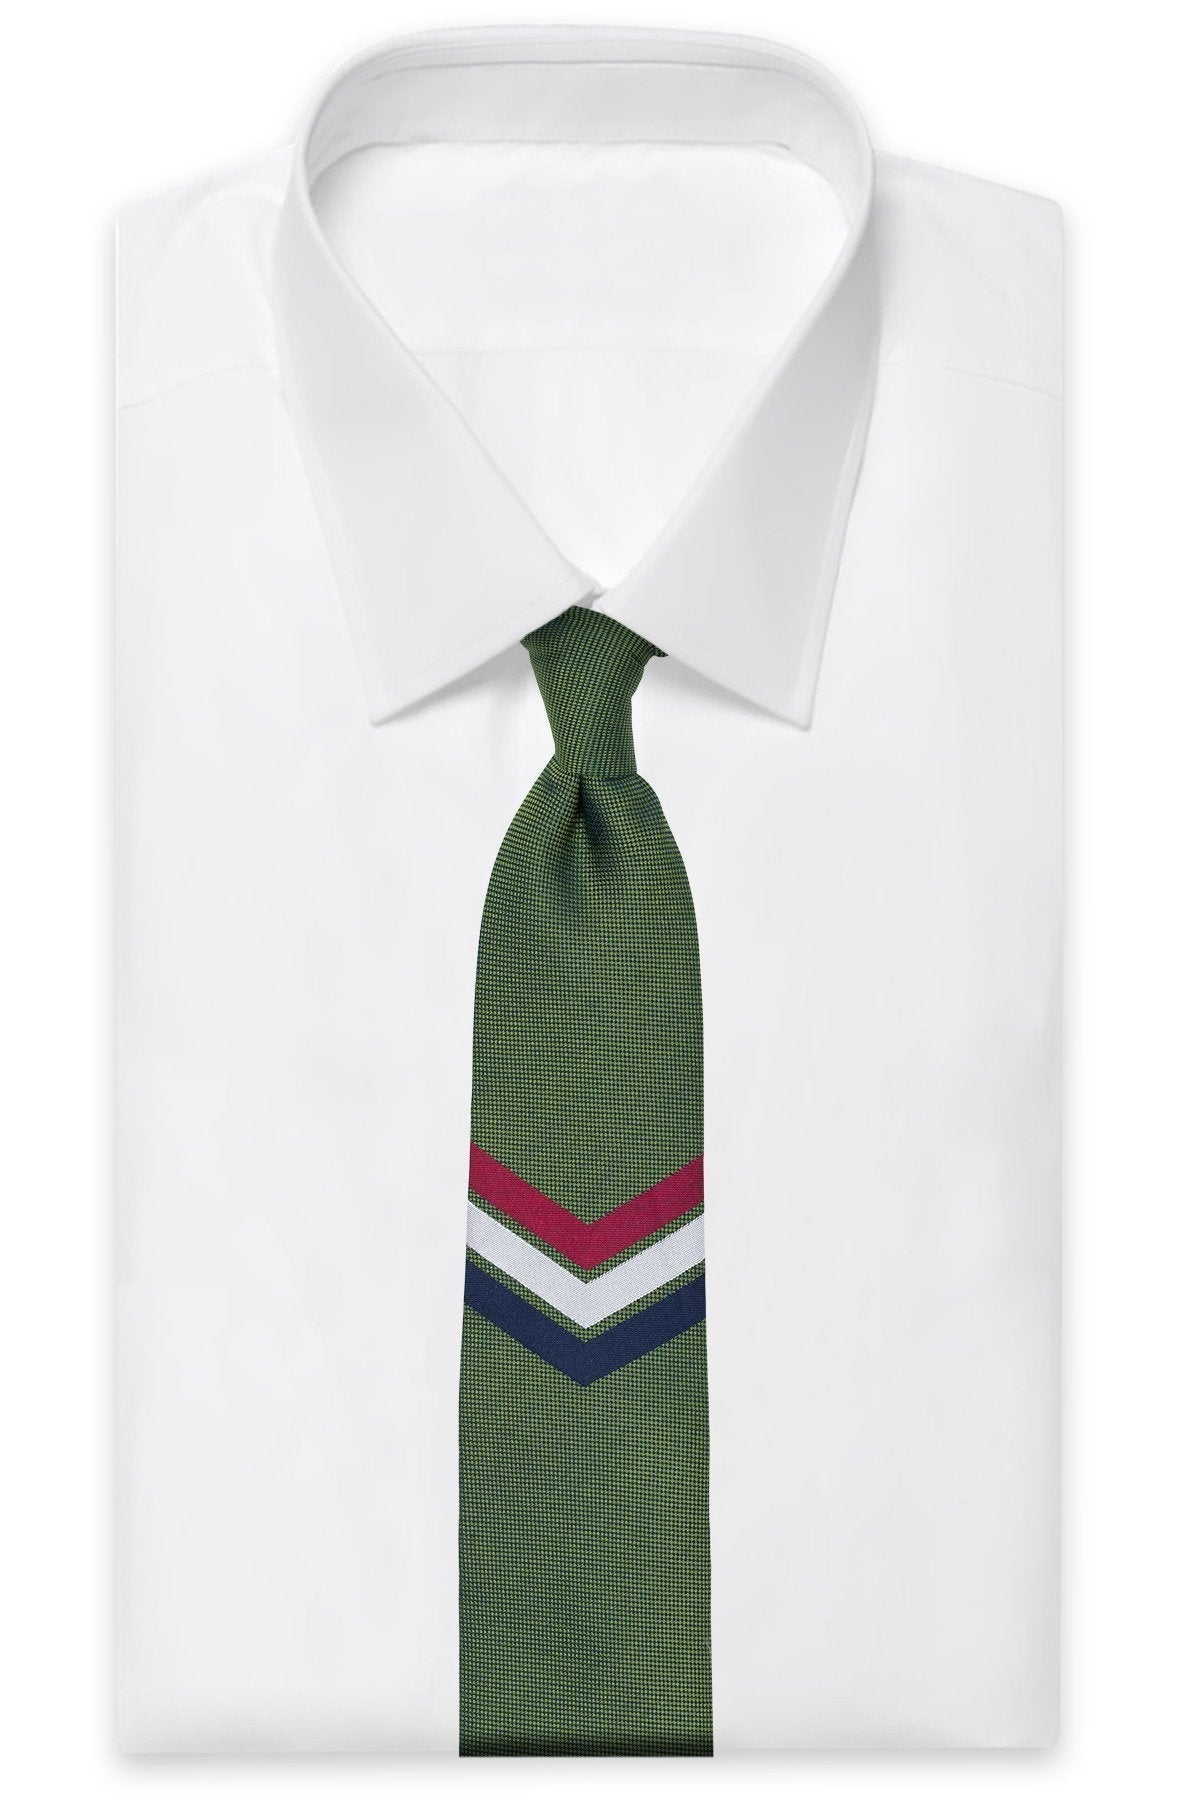 An ivy Slips Green Signature V Flag Tie